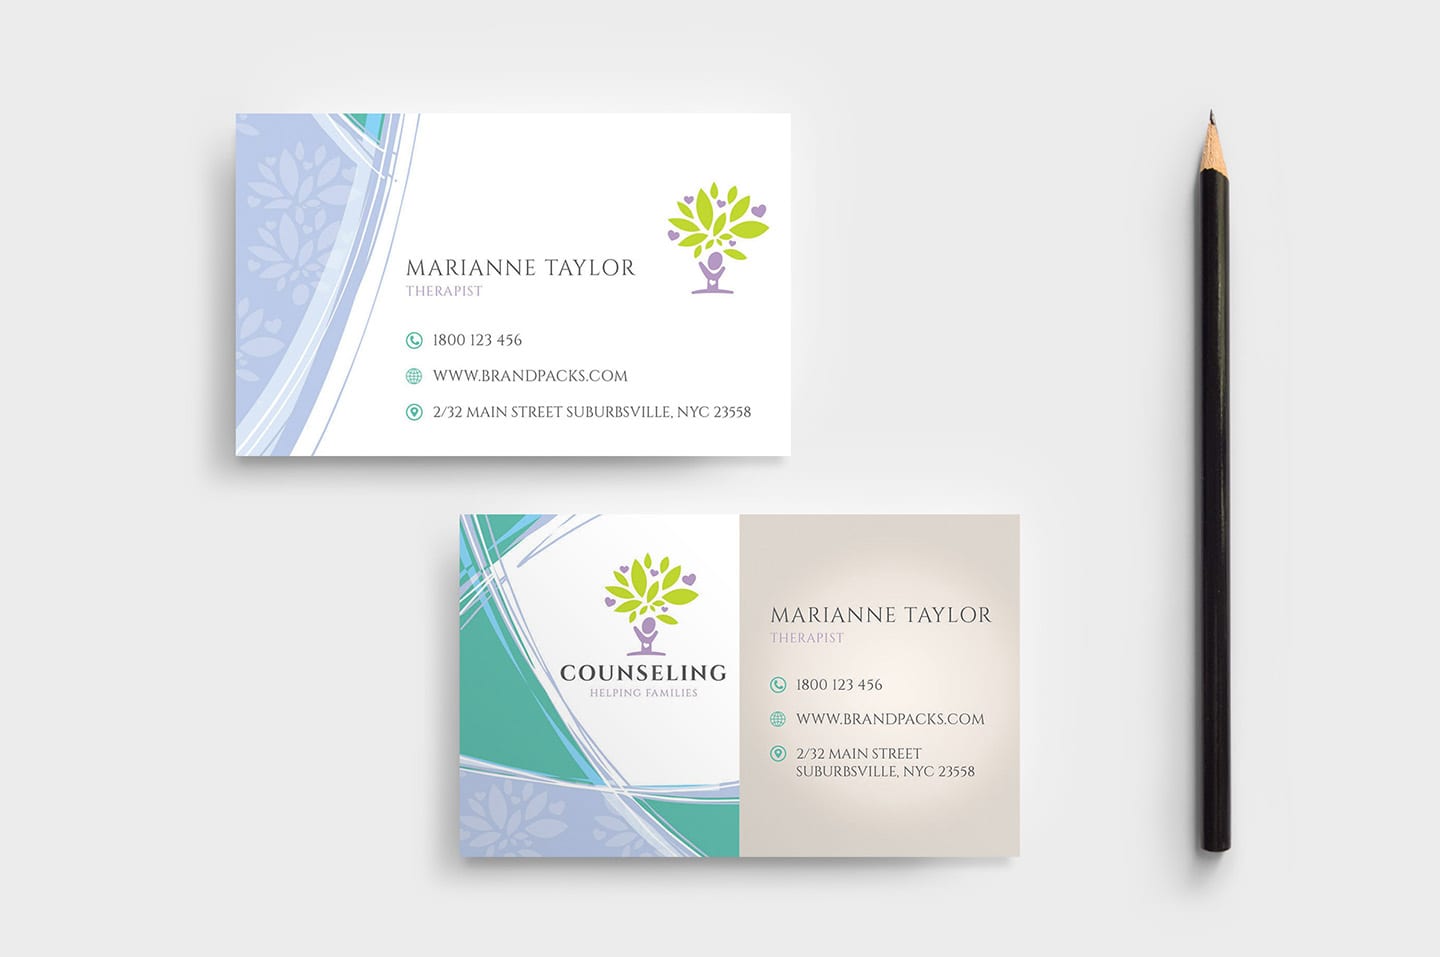 Counselling Service Business Card Template in PSD, Ai & Vector With Regard To Business Cards For Teachers Templates Free